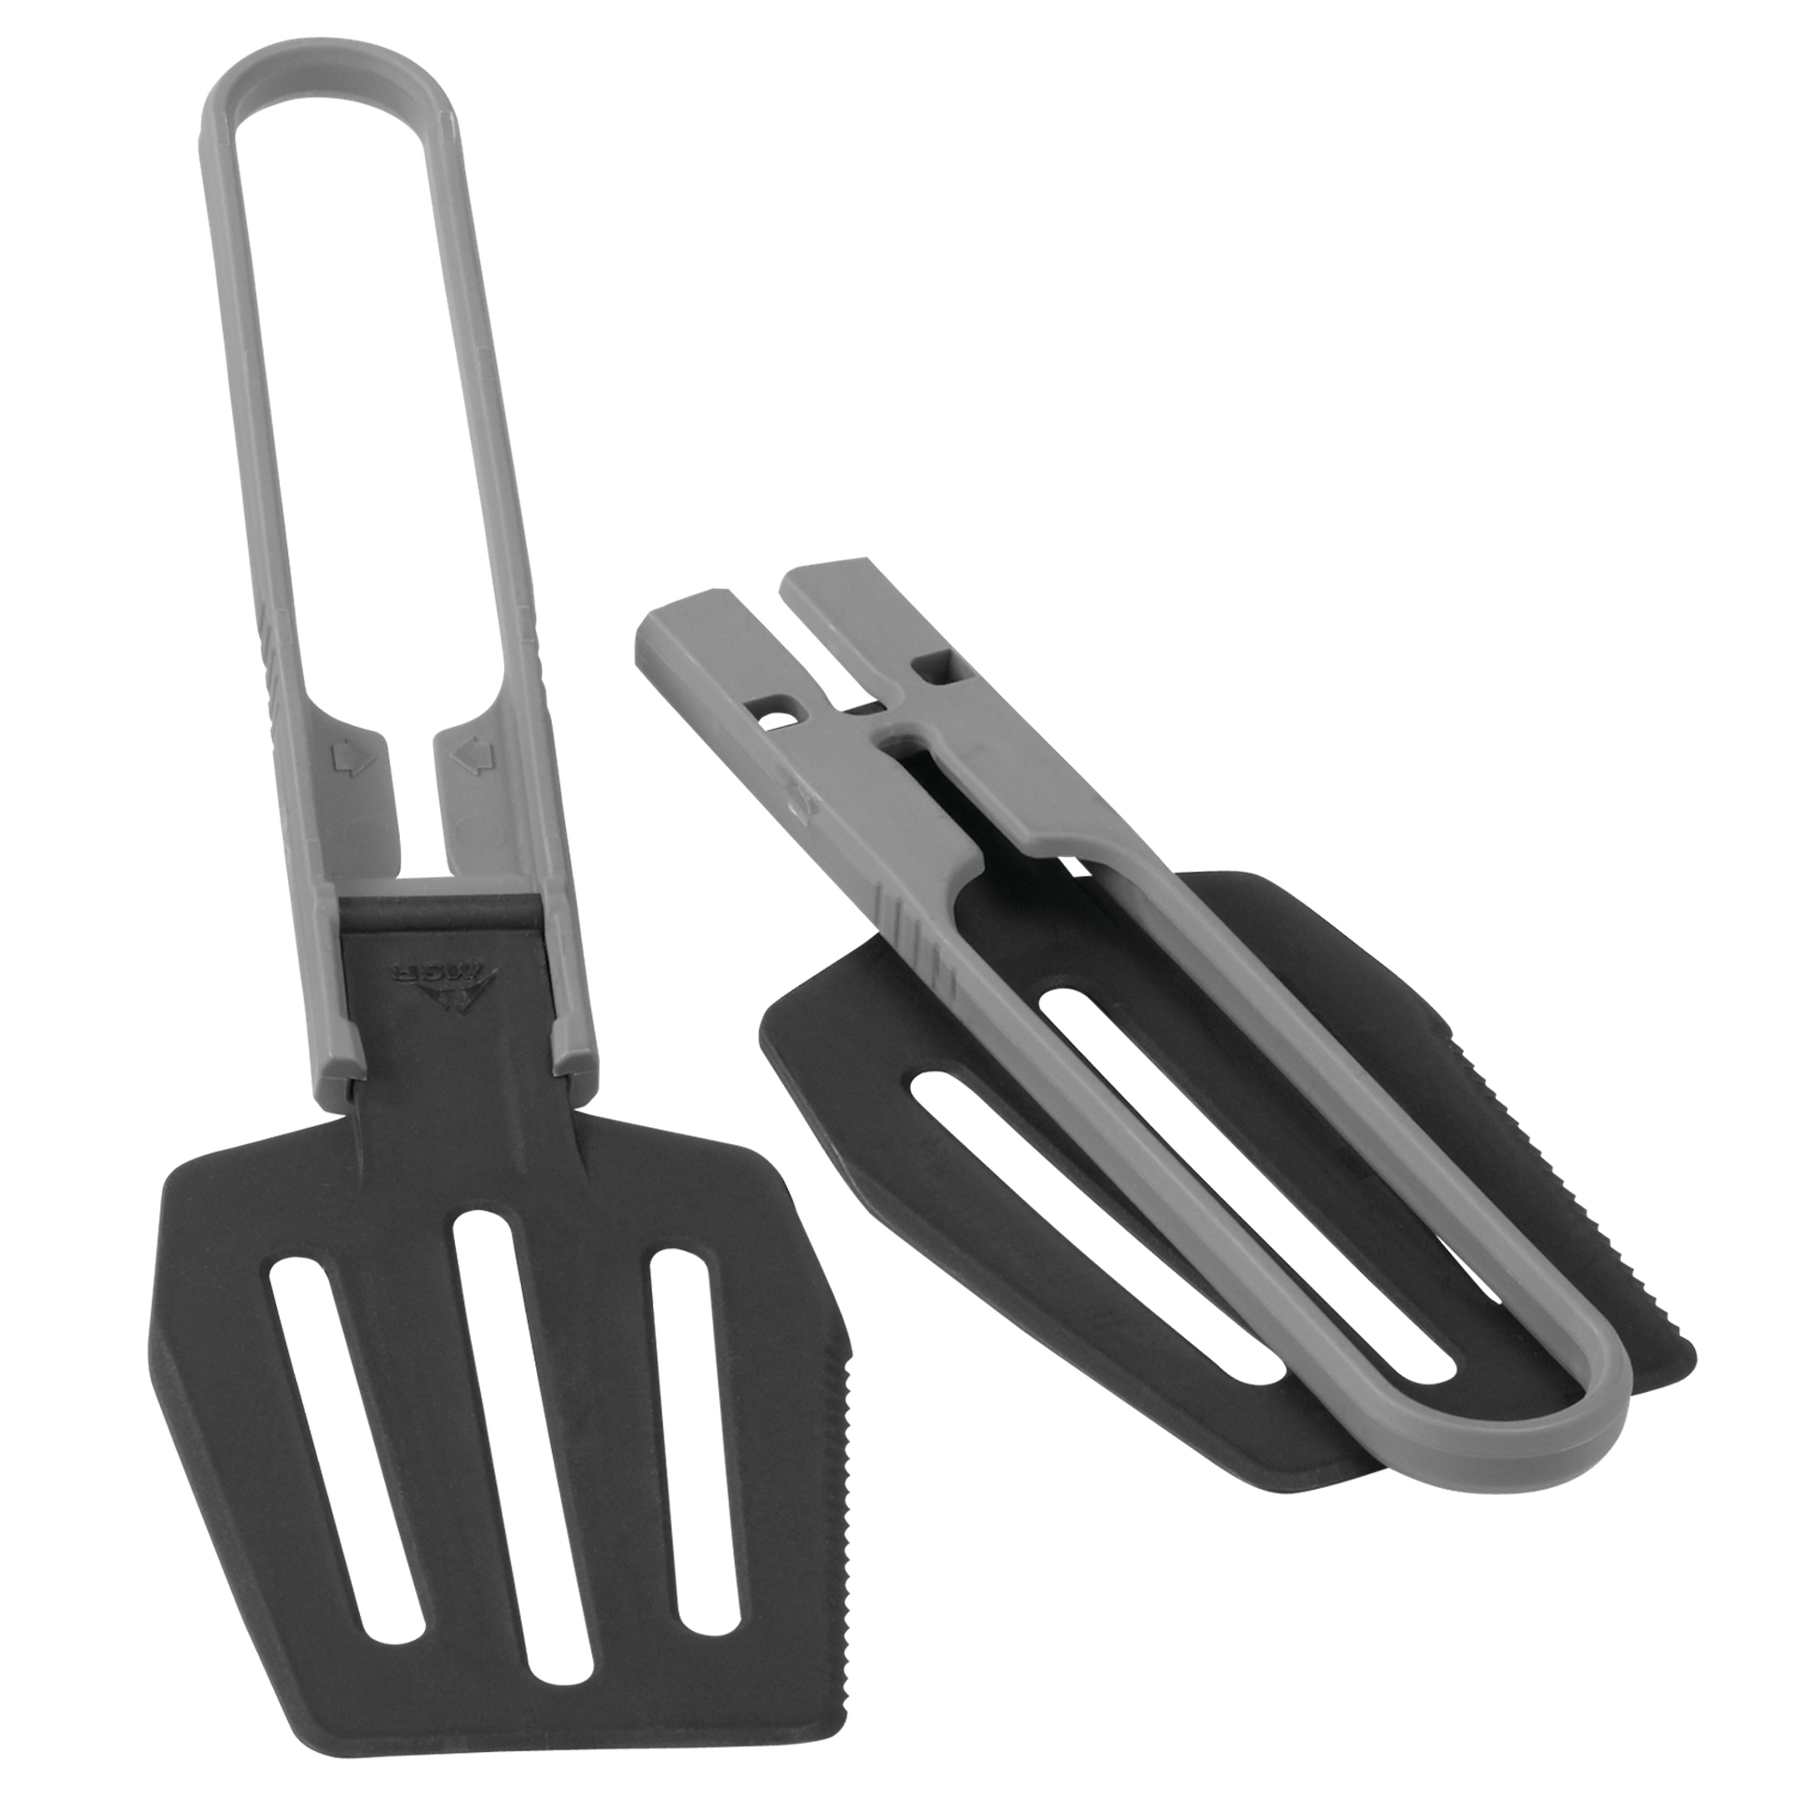 The msr alpine spatula, shown both open and closed